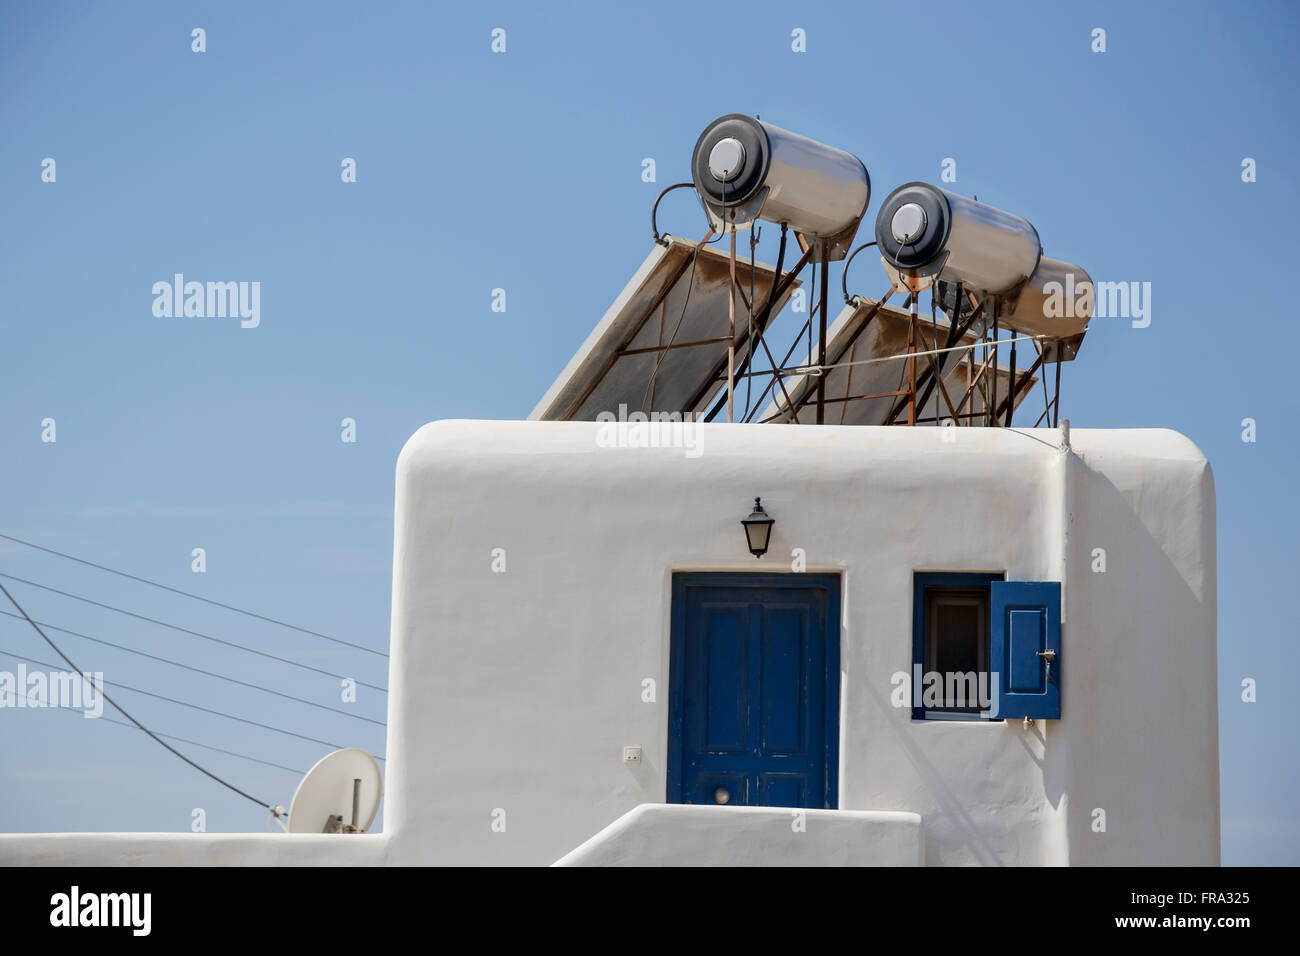 Modern solar panel powered hot water heaters for energy efficiency are mounted on the roof of a traditional greek home; Mykonos, Greece Stock Photo